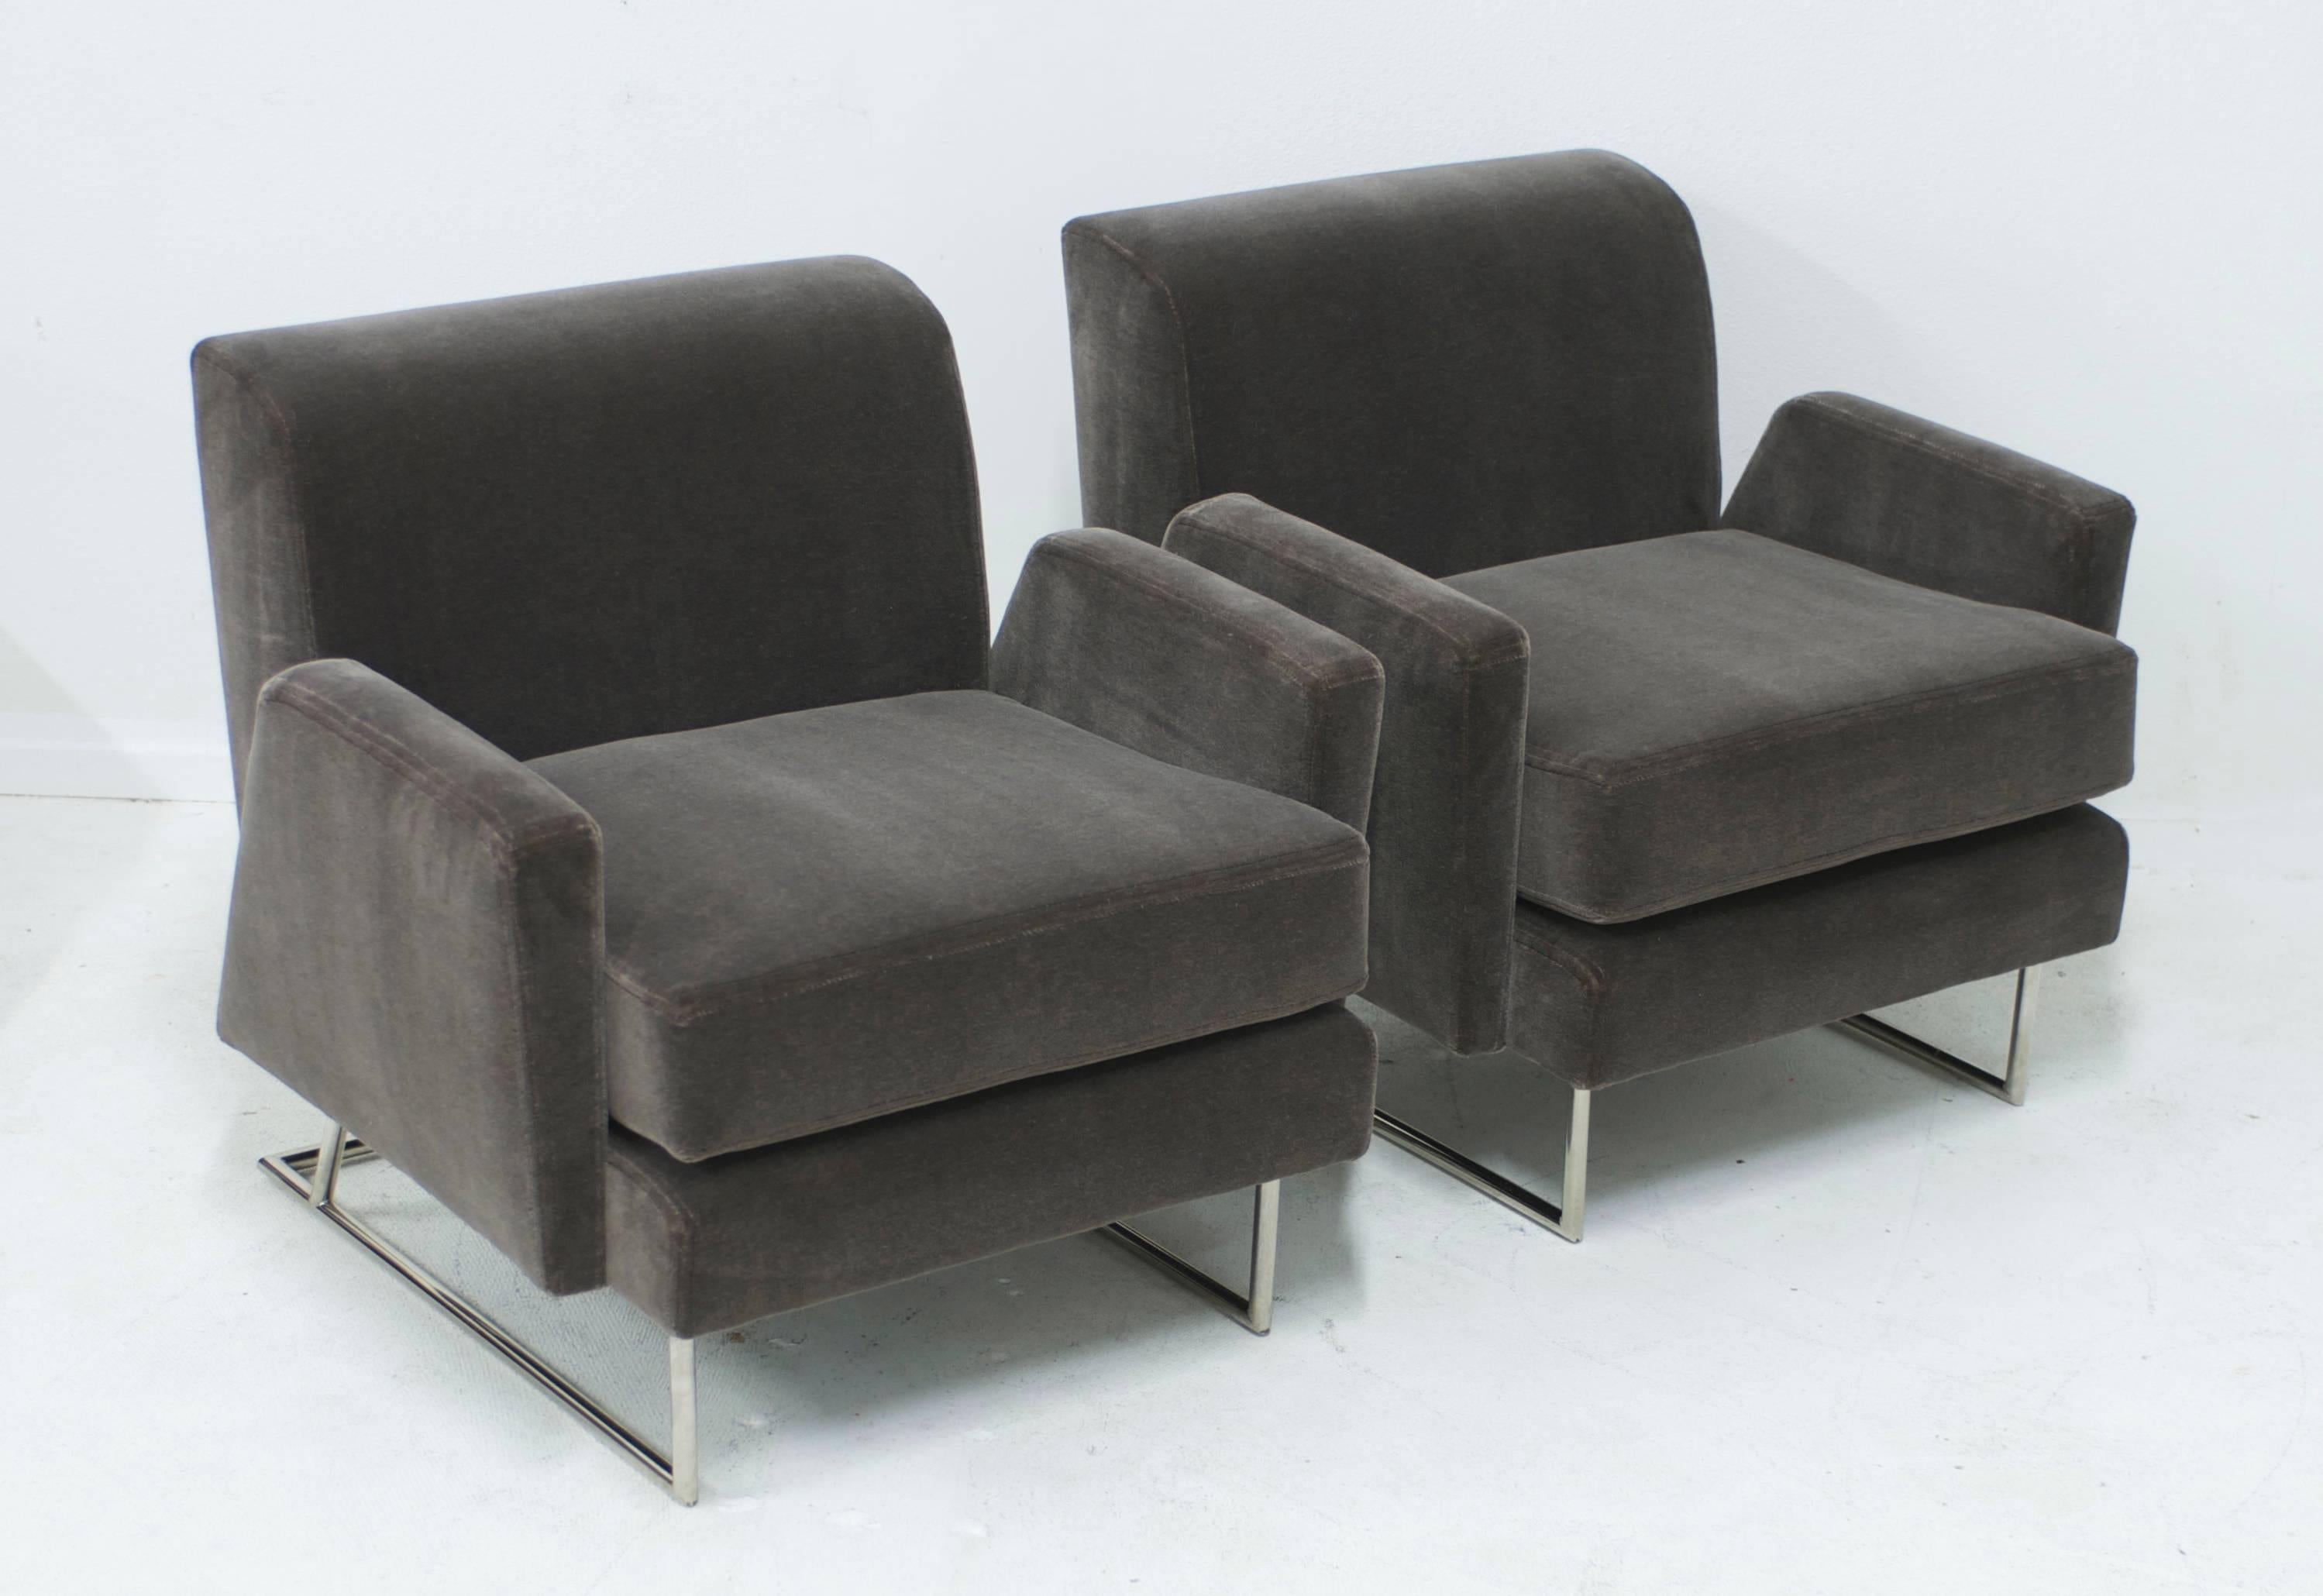 20th Century Pair of Lounge Chairs in Chocolate Taupe Mohair